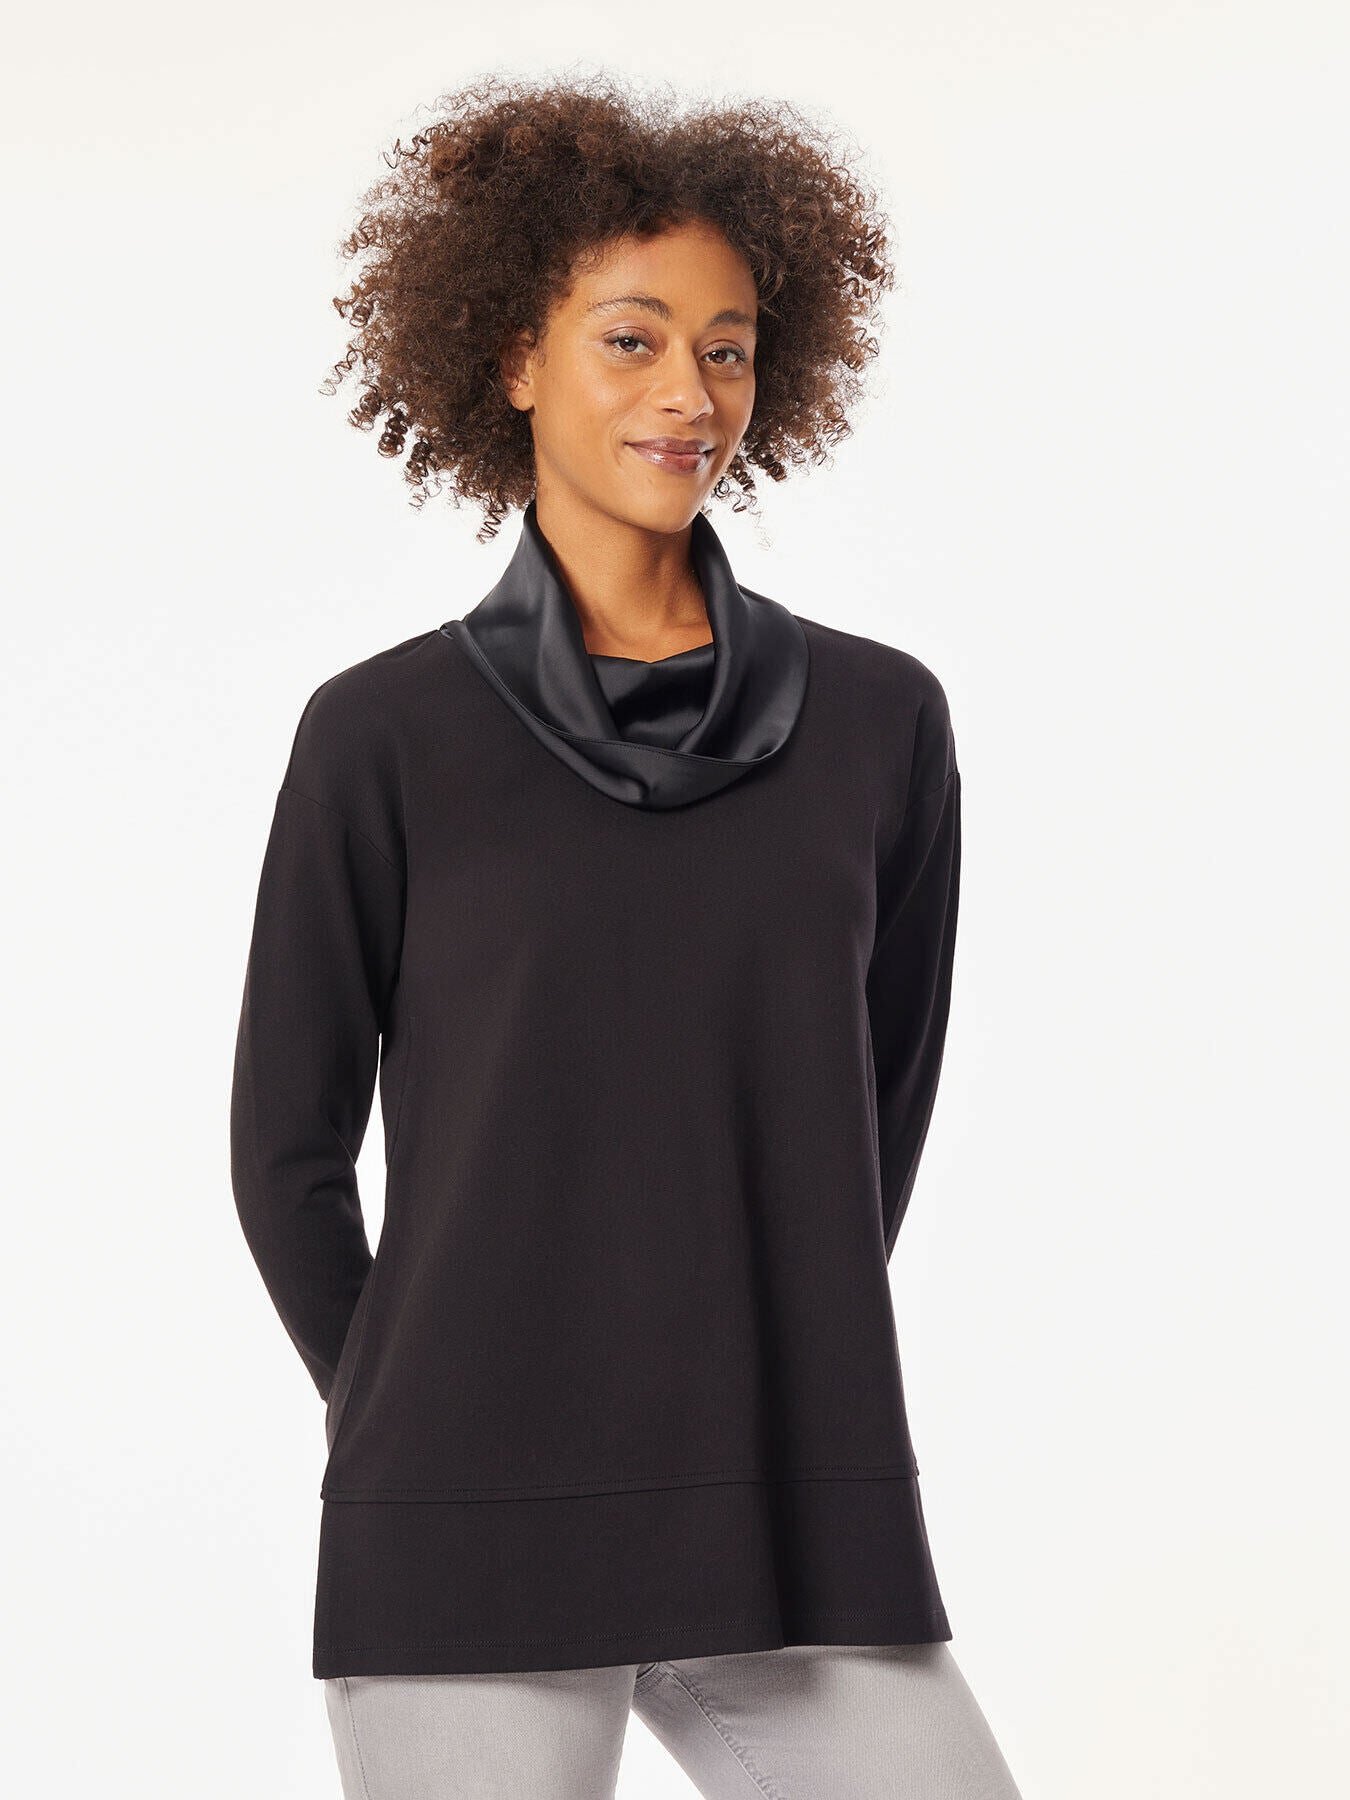 Serenity Knit Cowl Neck Tunic